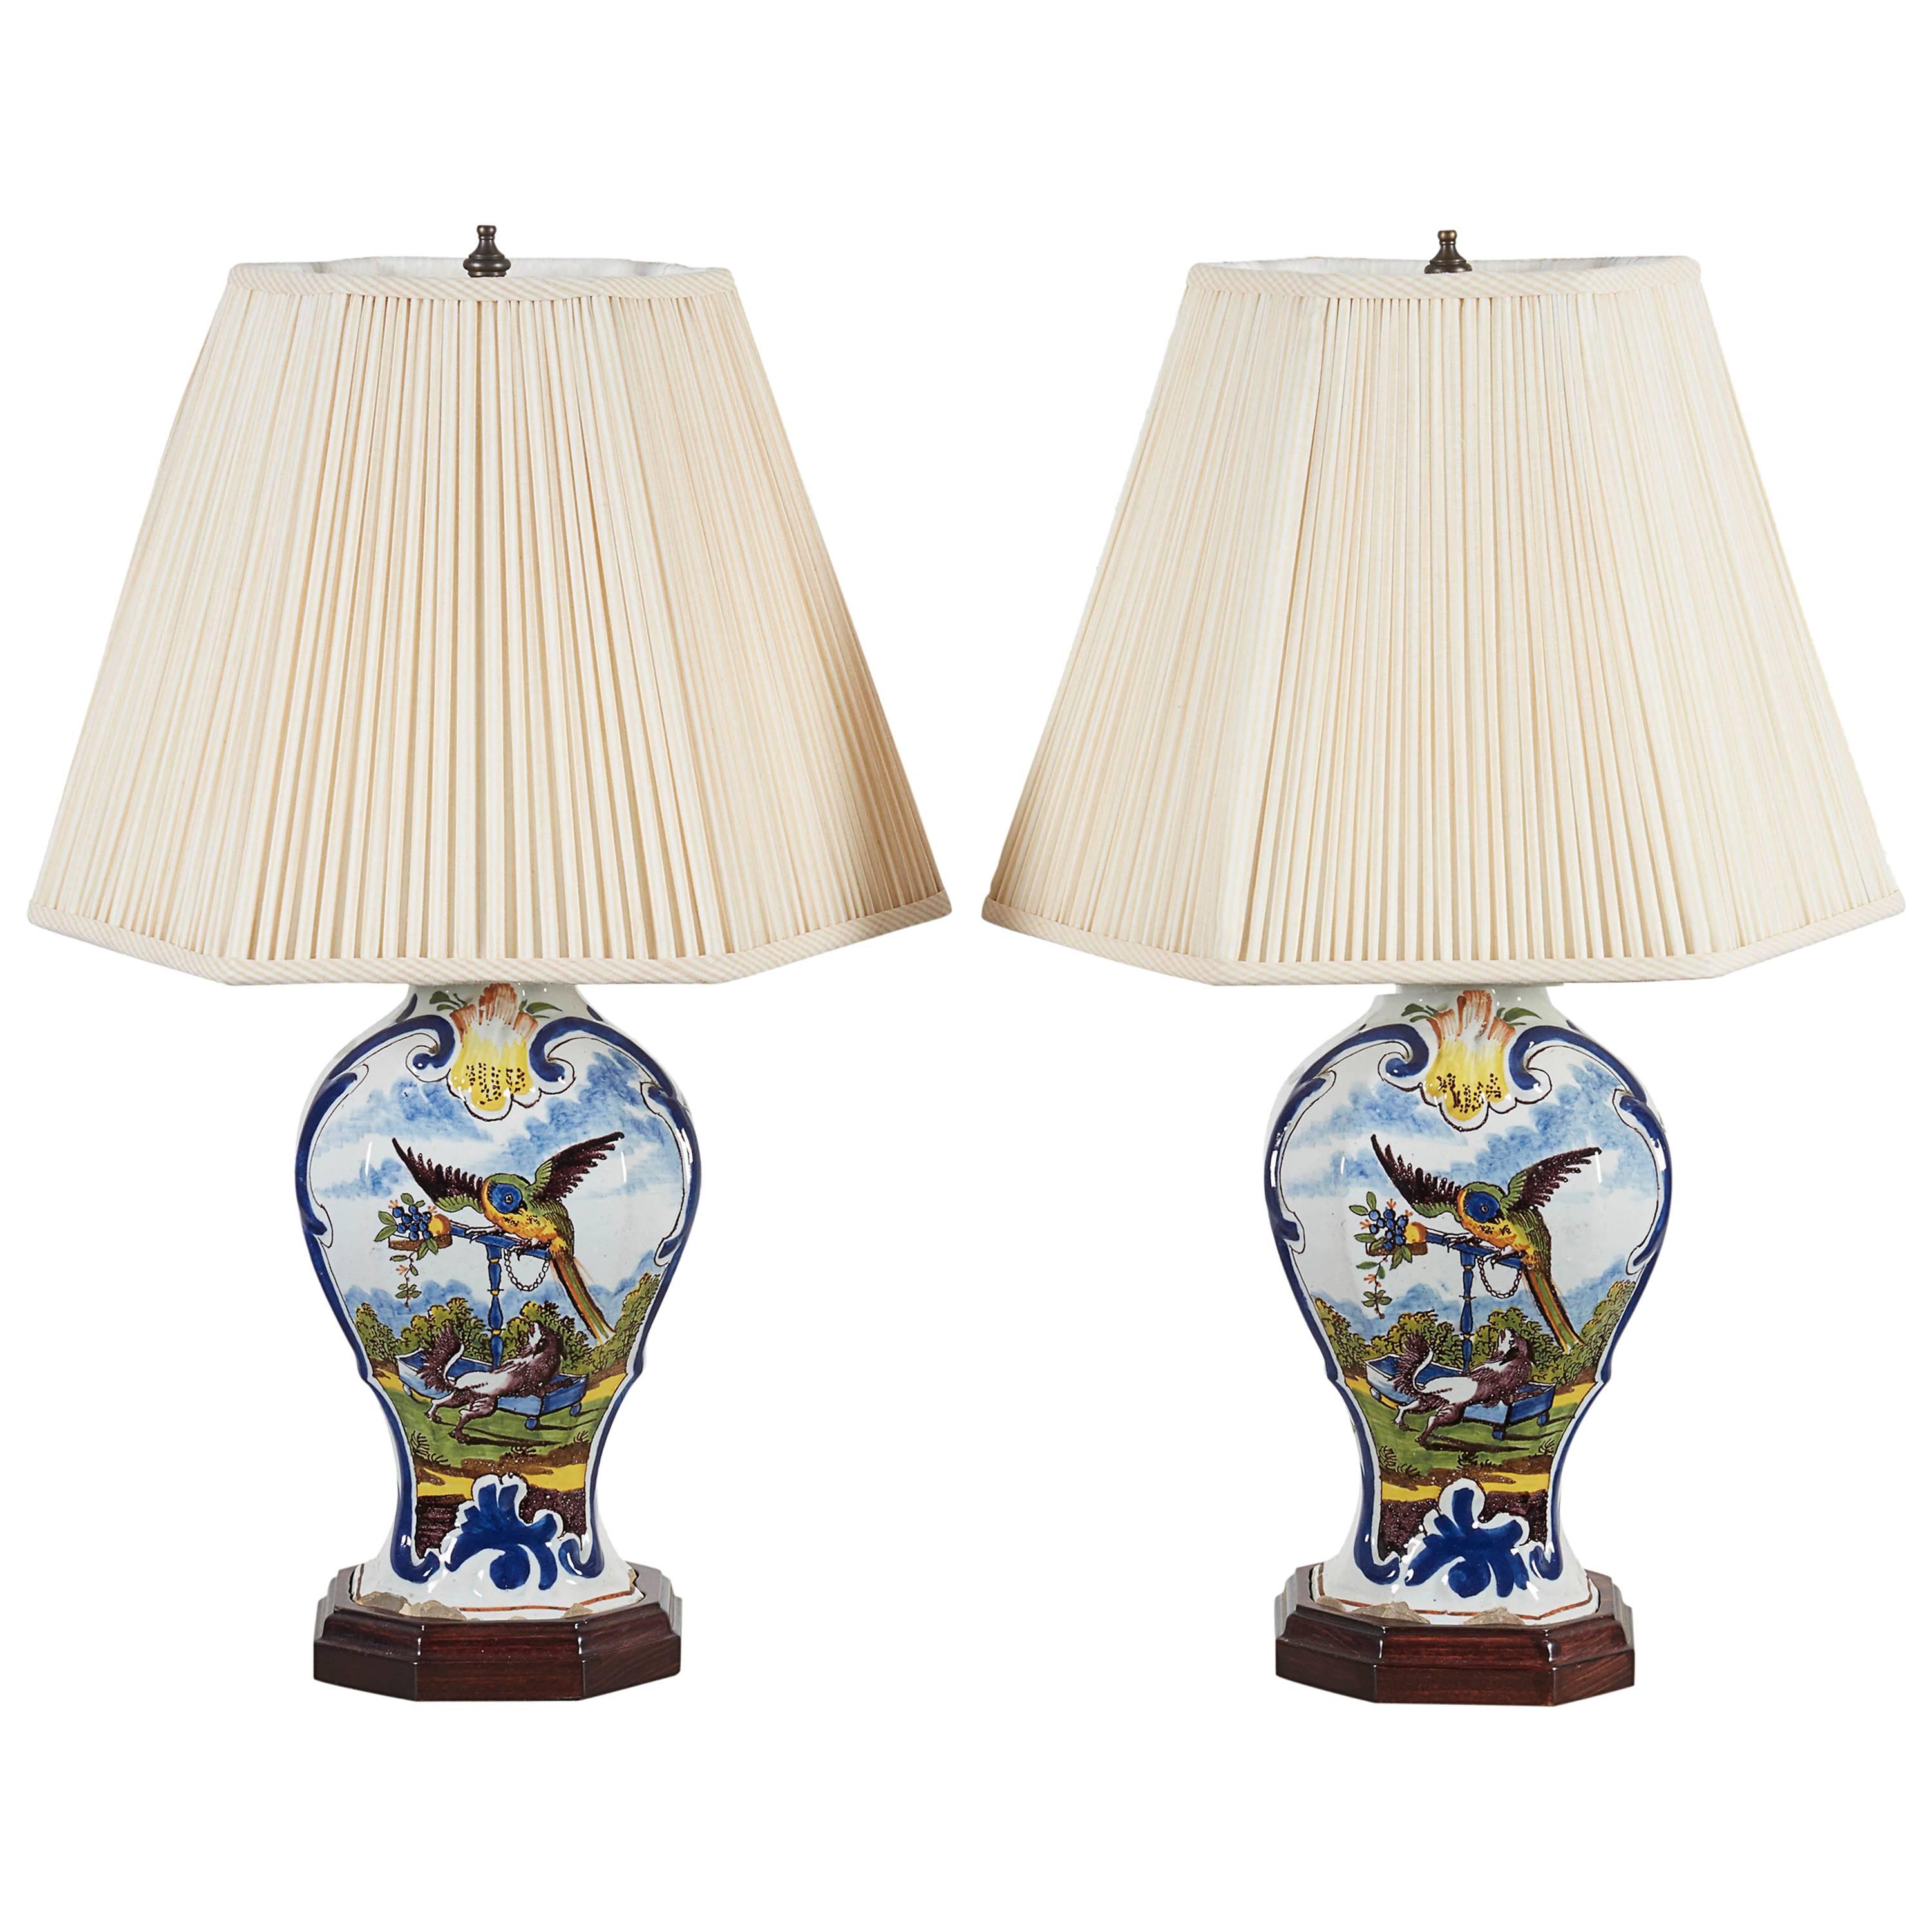 Pair of Polychrome Delft Vases Mounted Lamps